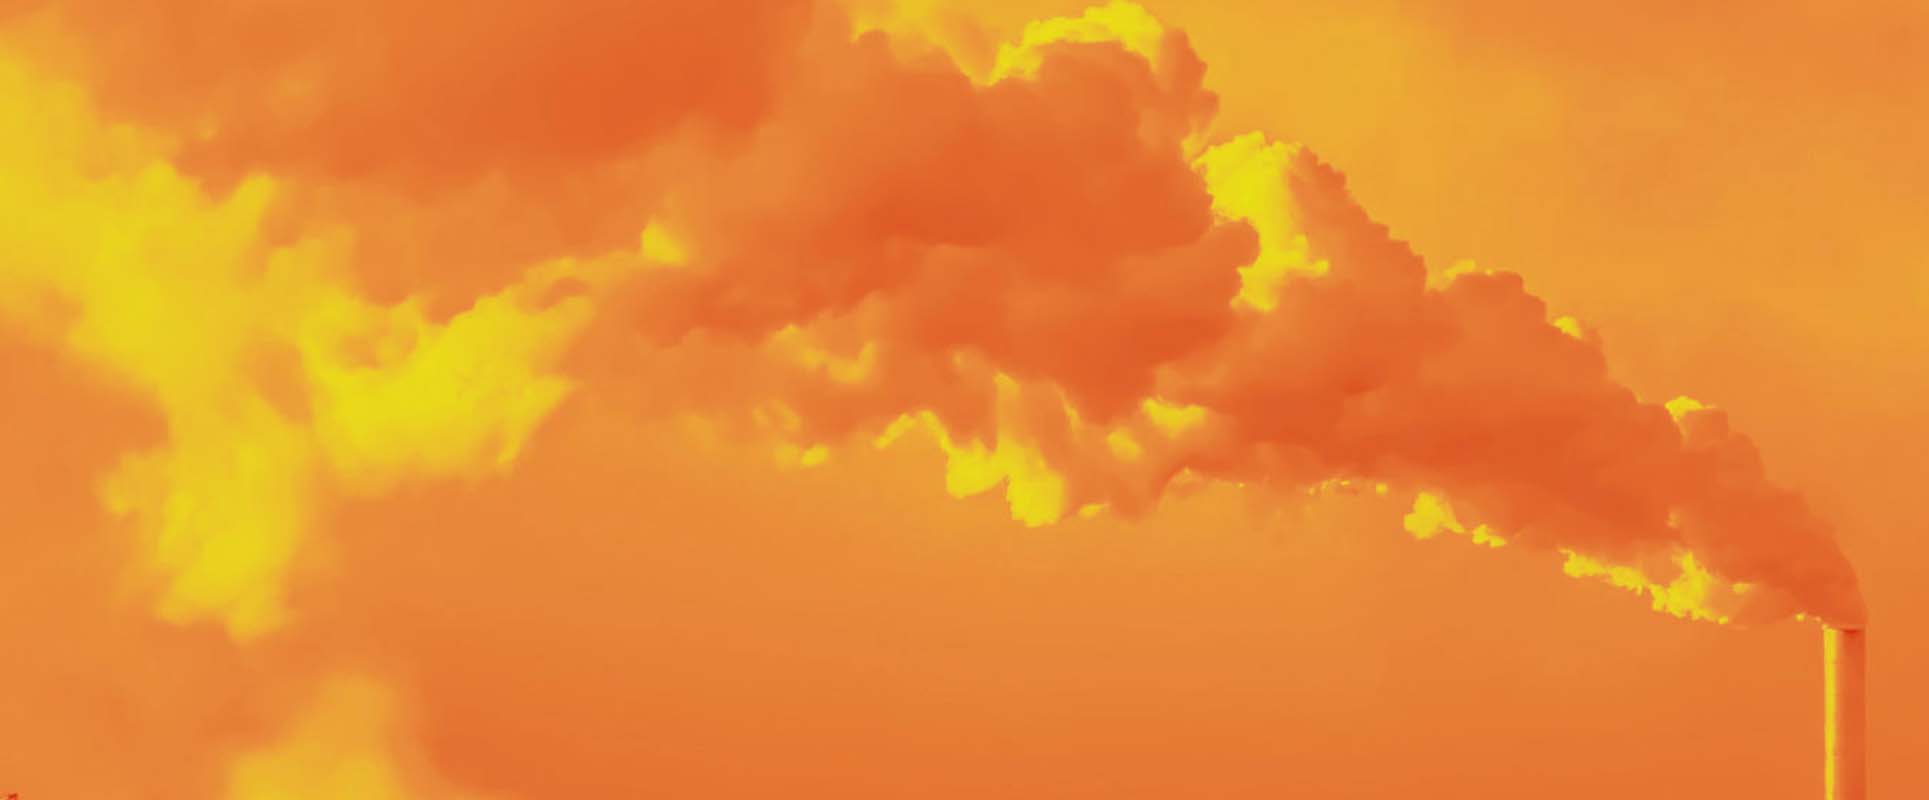 an orange background with smoke billowing out